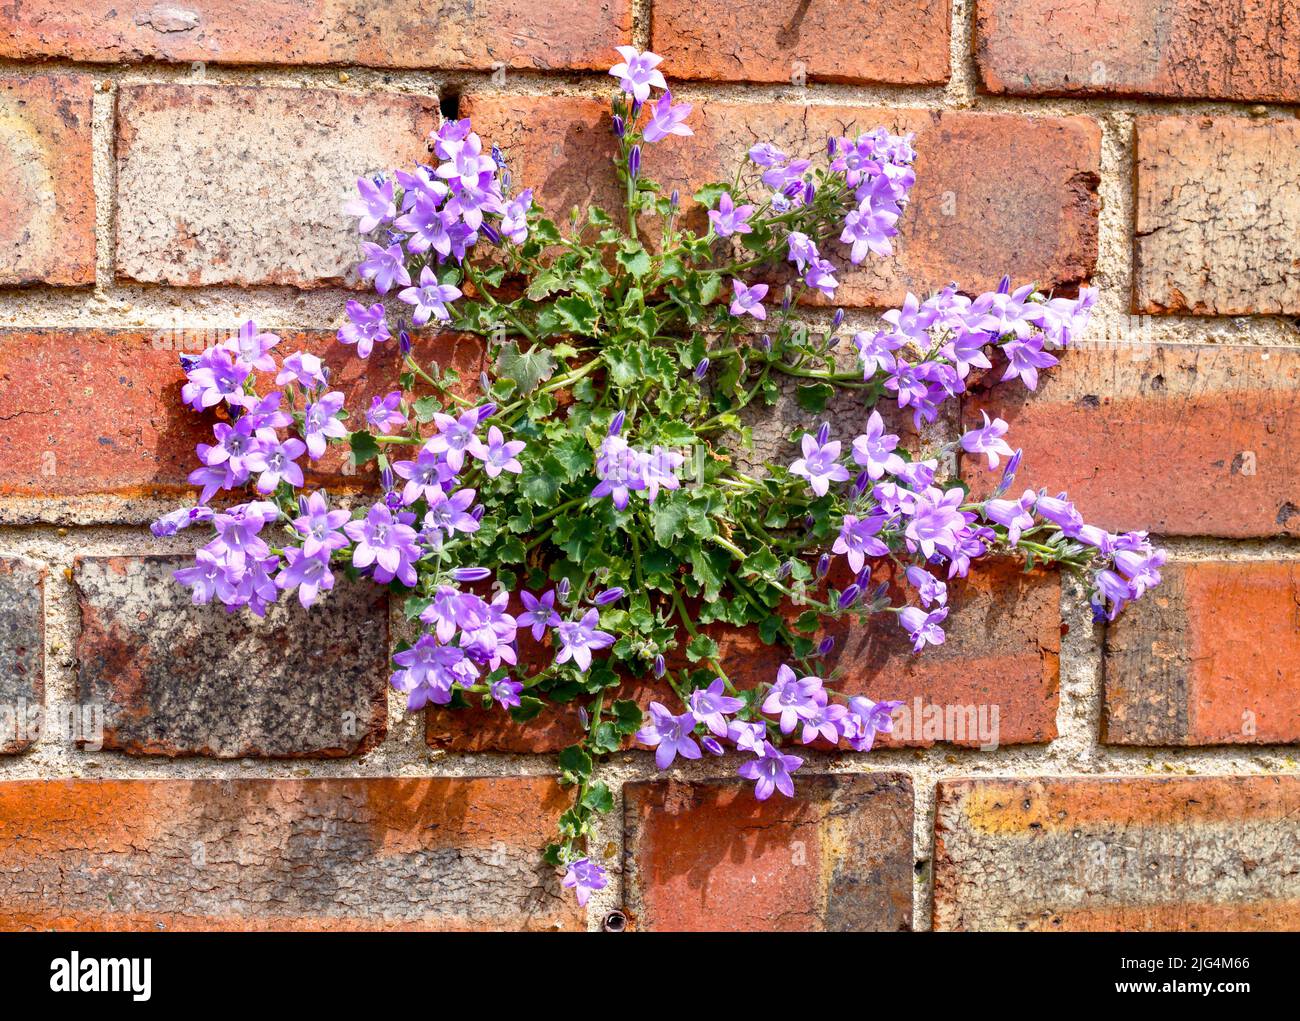 Dalmatian bellflower growing out of a brick wall, Stock Photo